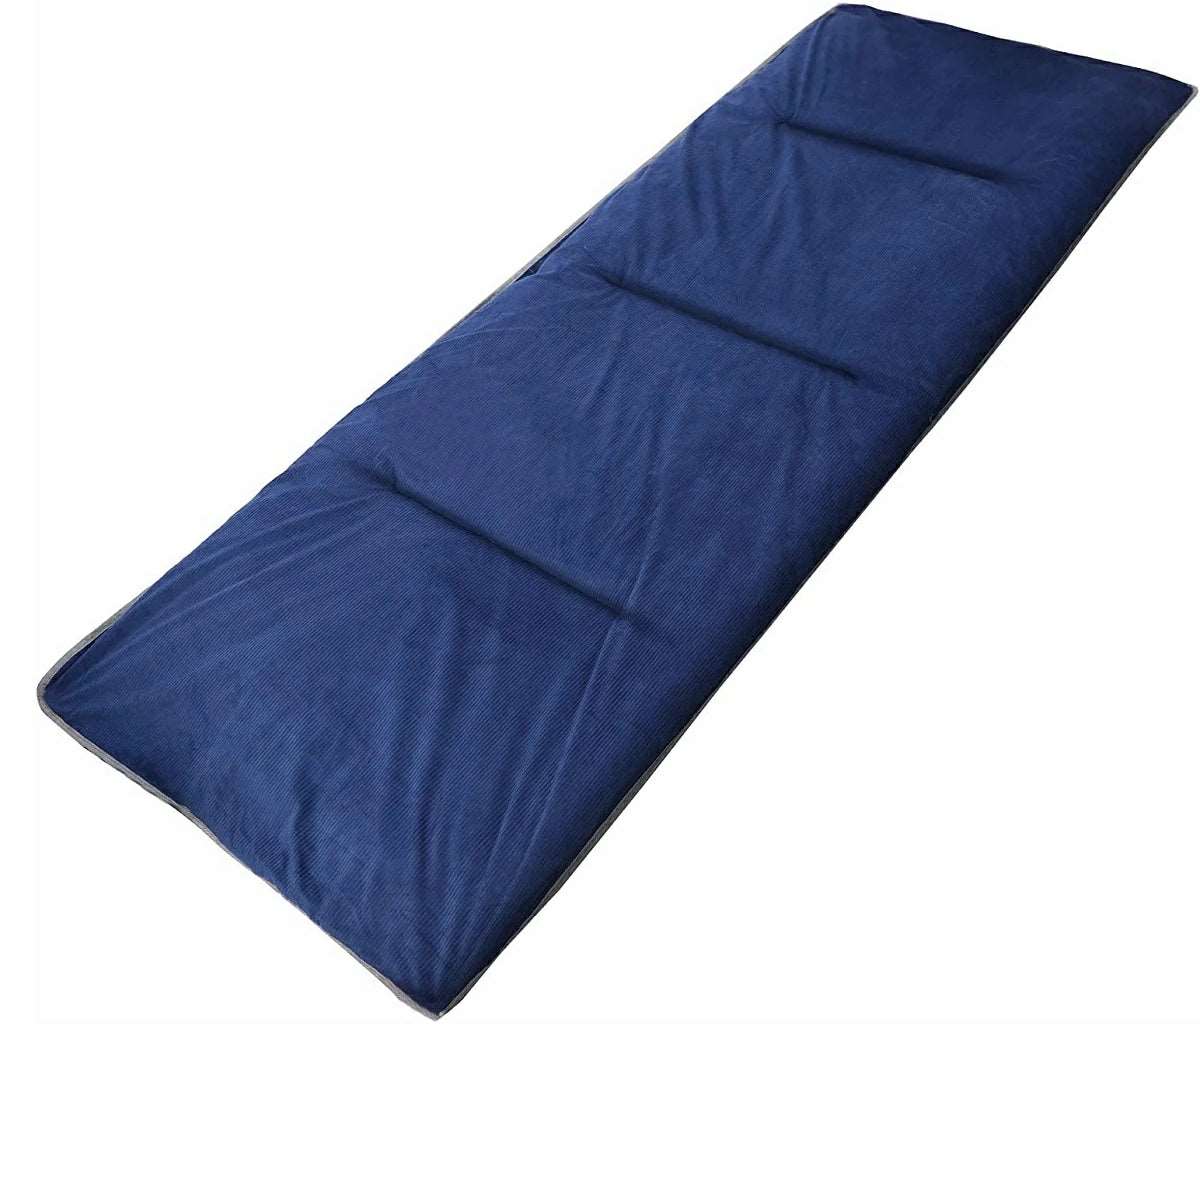 Sleeping Cot Pads for Camping